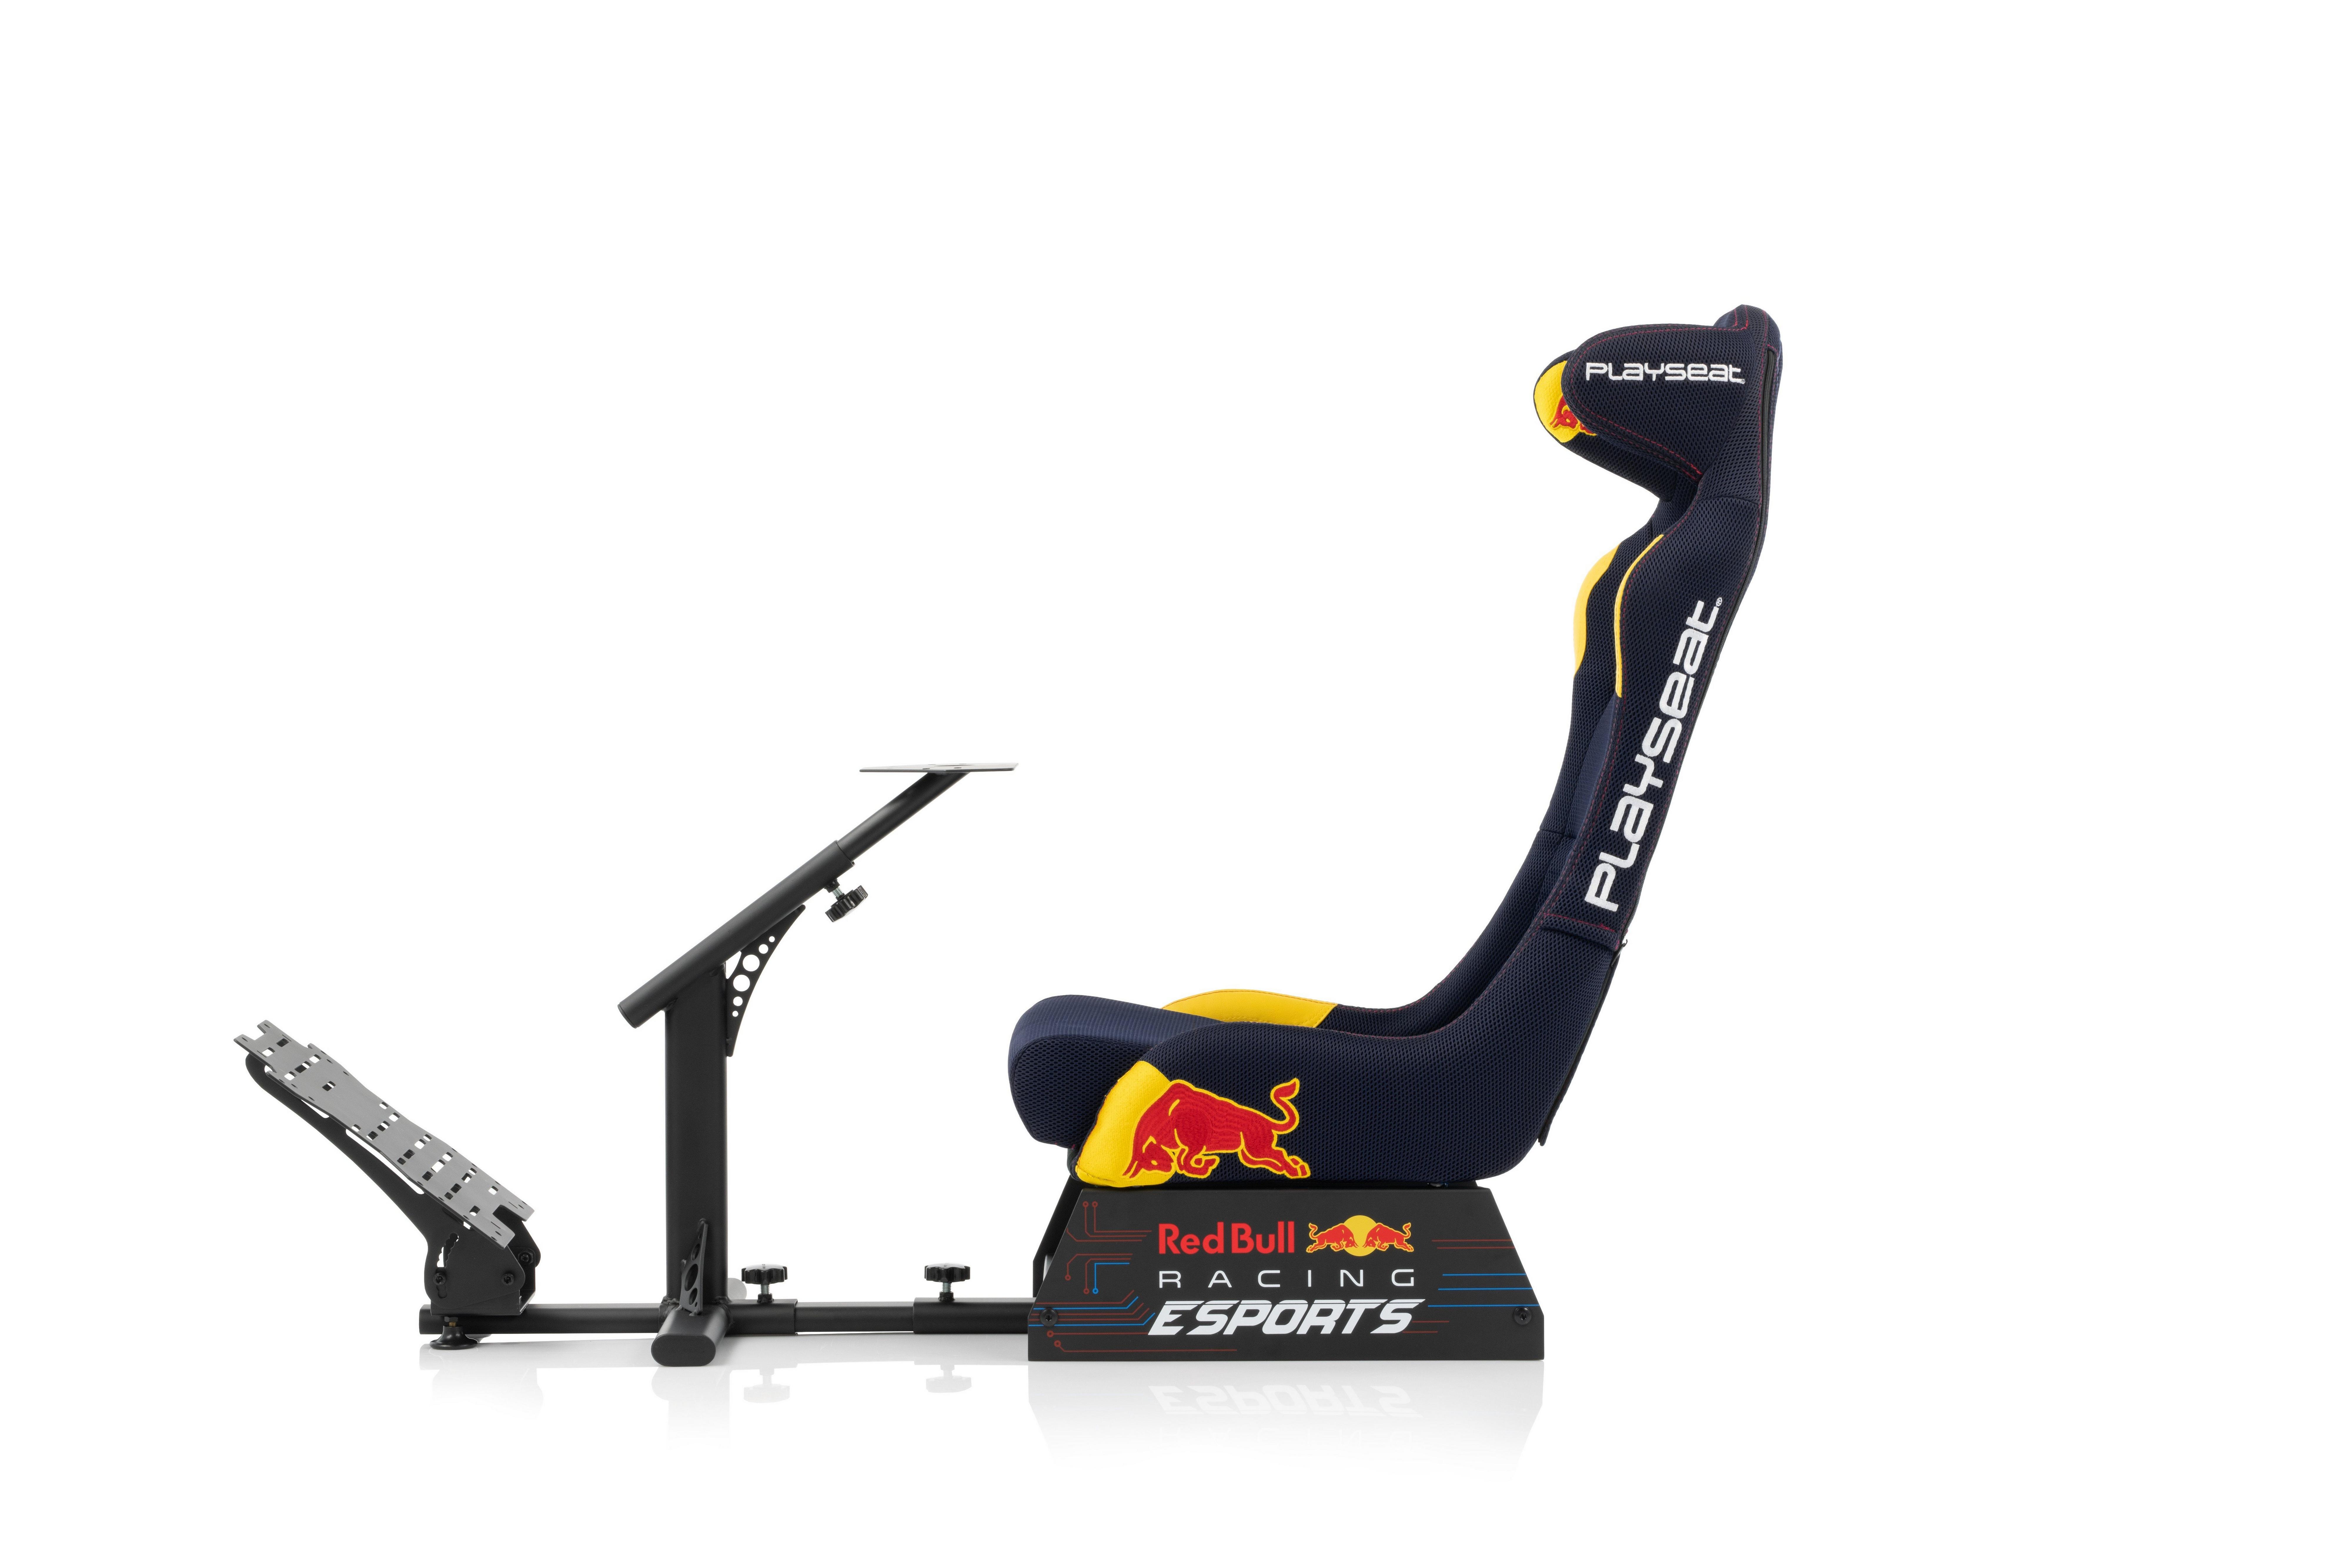 Pack F1 PRO Red Bull + volante - Playseat